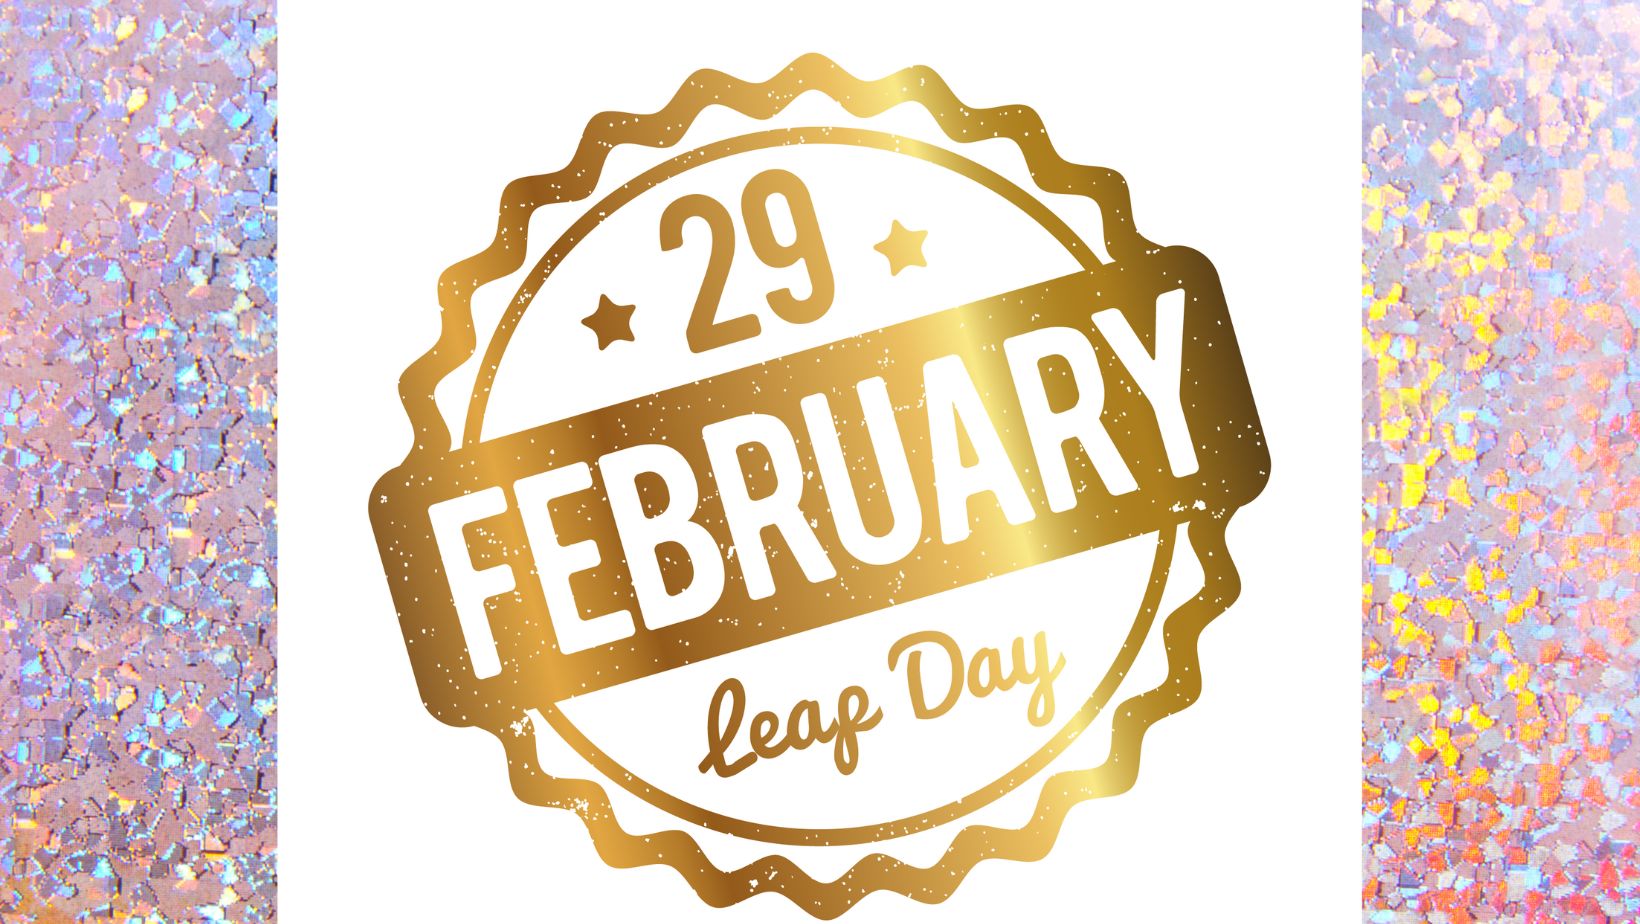 Sparkly words "February 29 Leap Day"